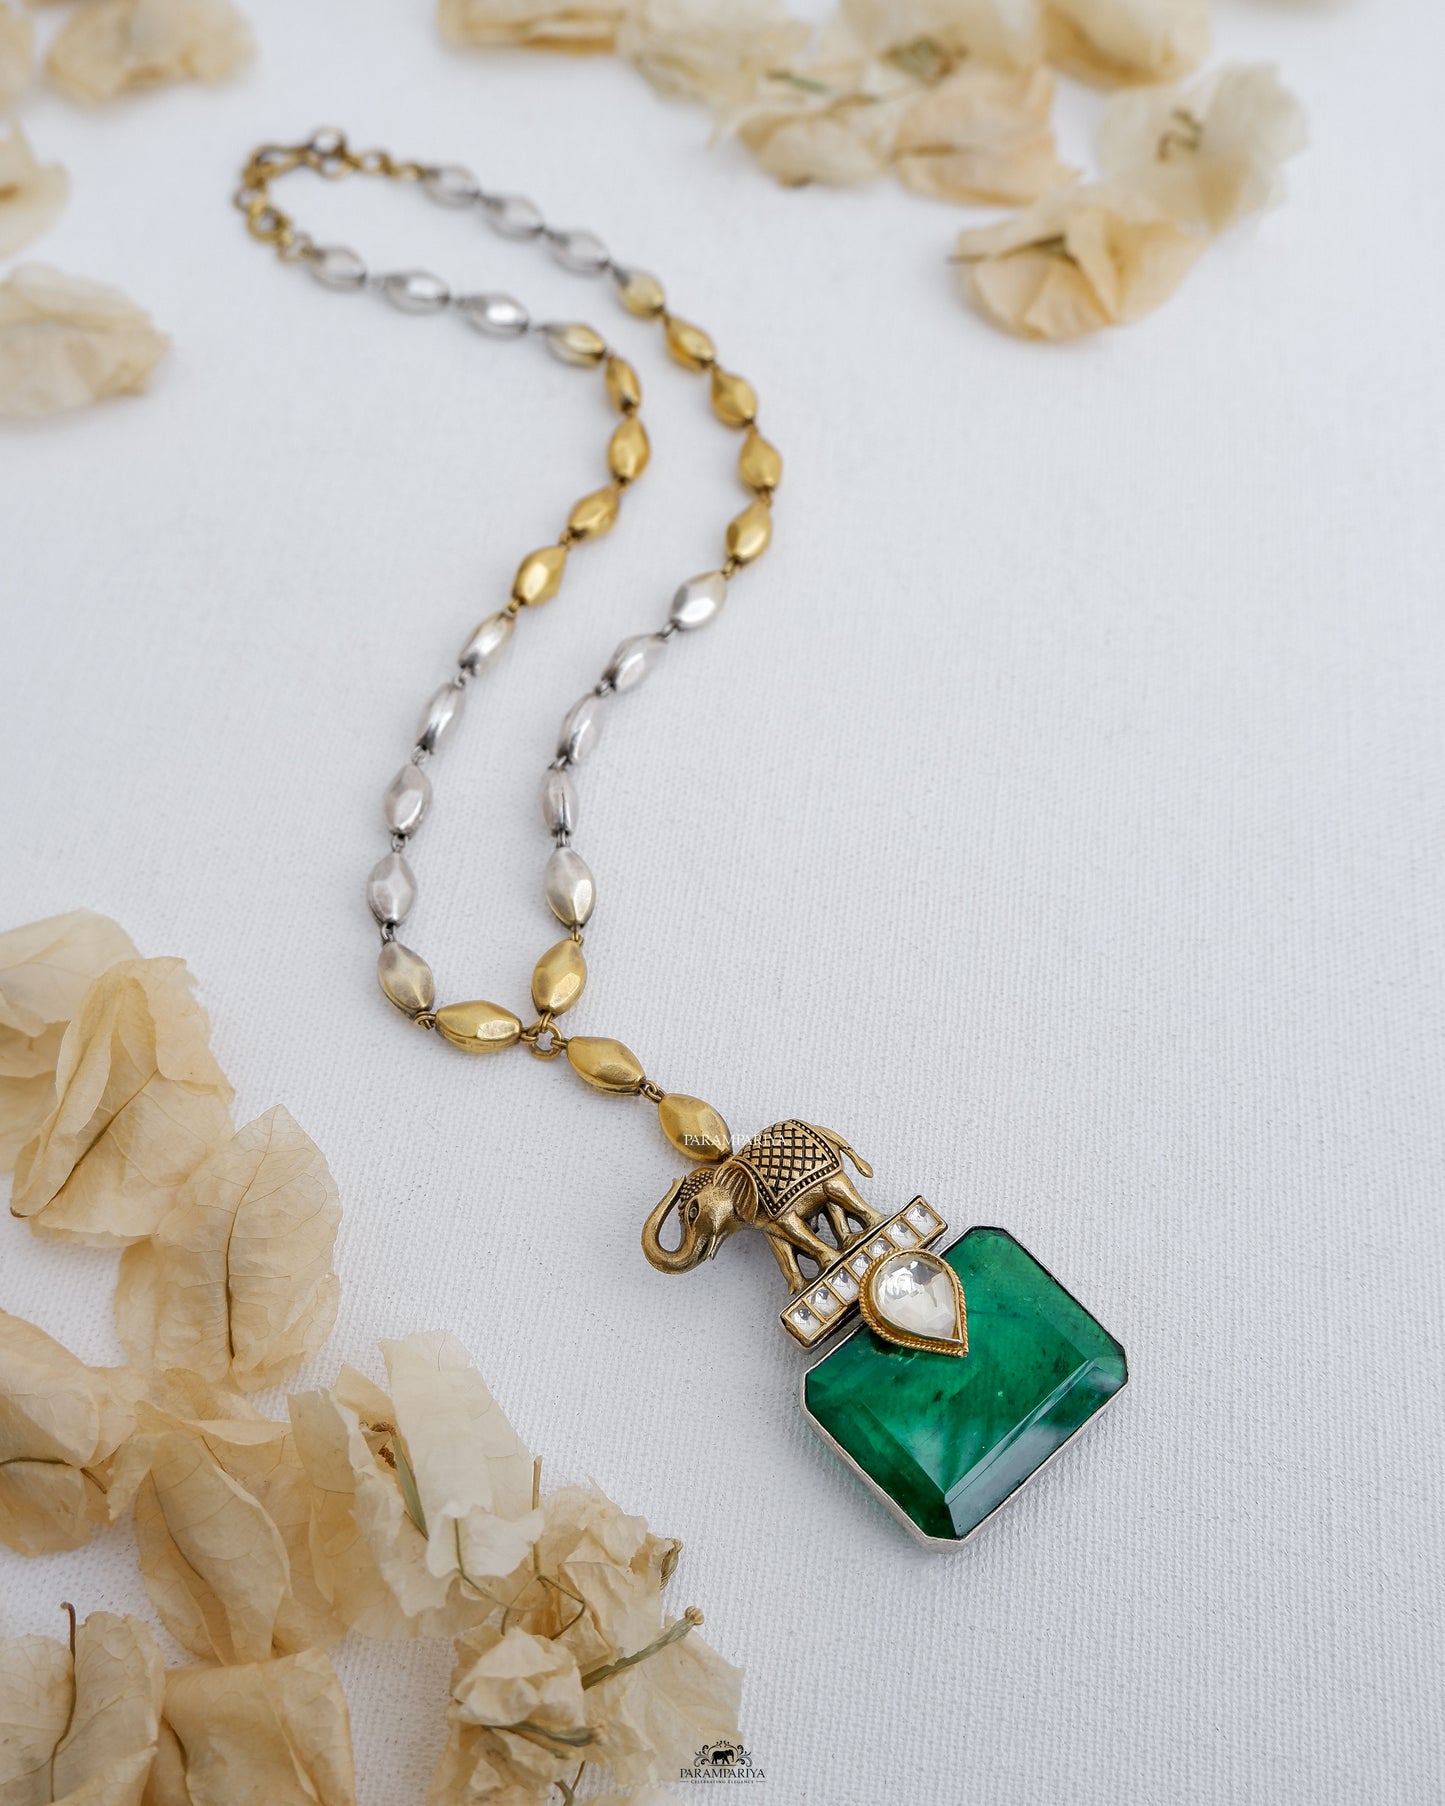 This stunning piece features a beautiful elephant design, adorned with a sparkling green doublet stone. Crafted with pure silver and dual tone plating, this necklace makes a statement of elegance and sophistication.